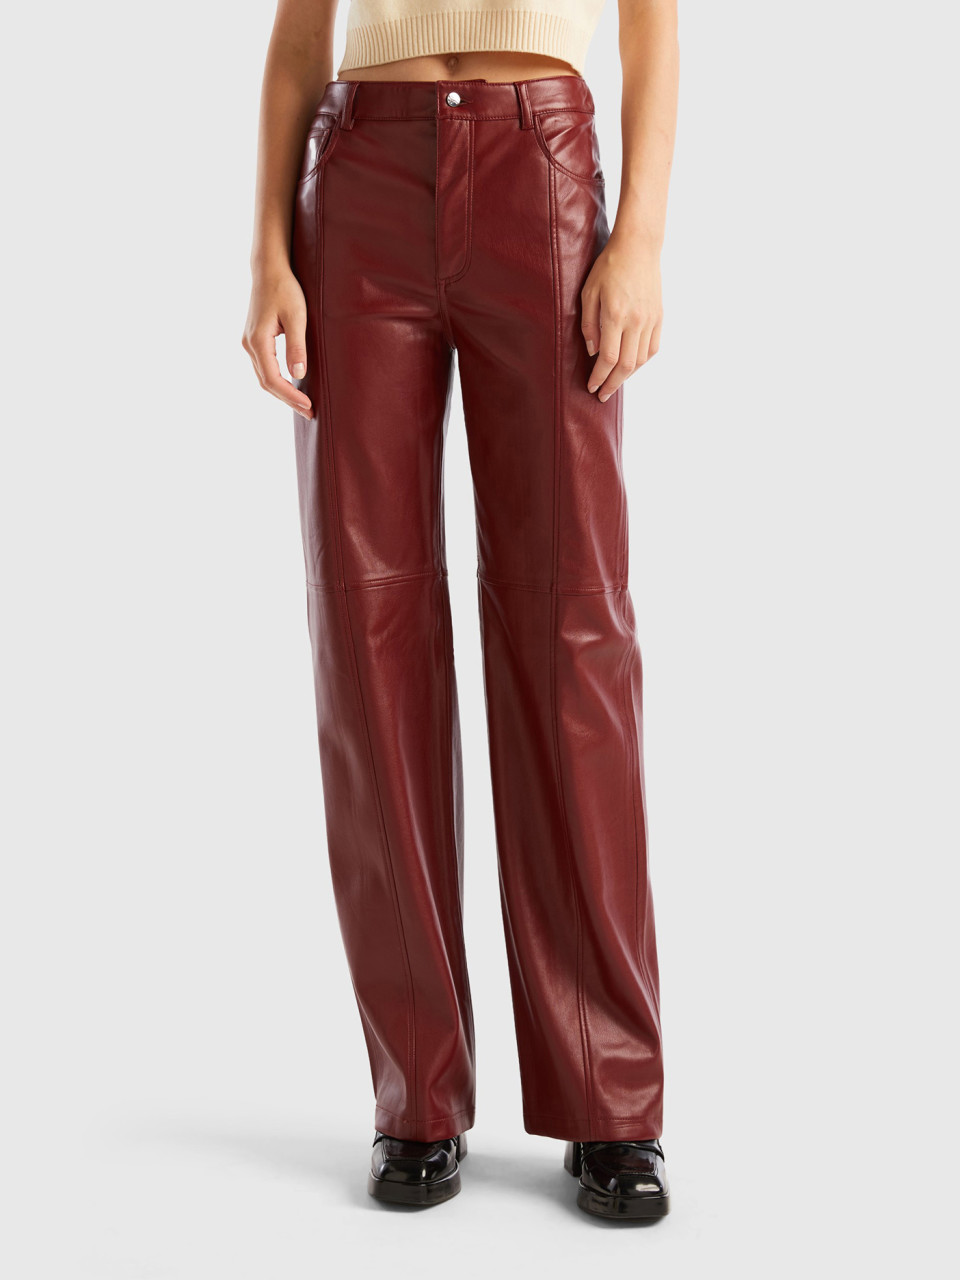 Benetton, Trousers In Imitation Leather Fabric, Burgundy, Women